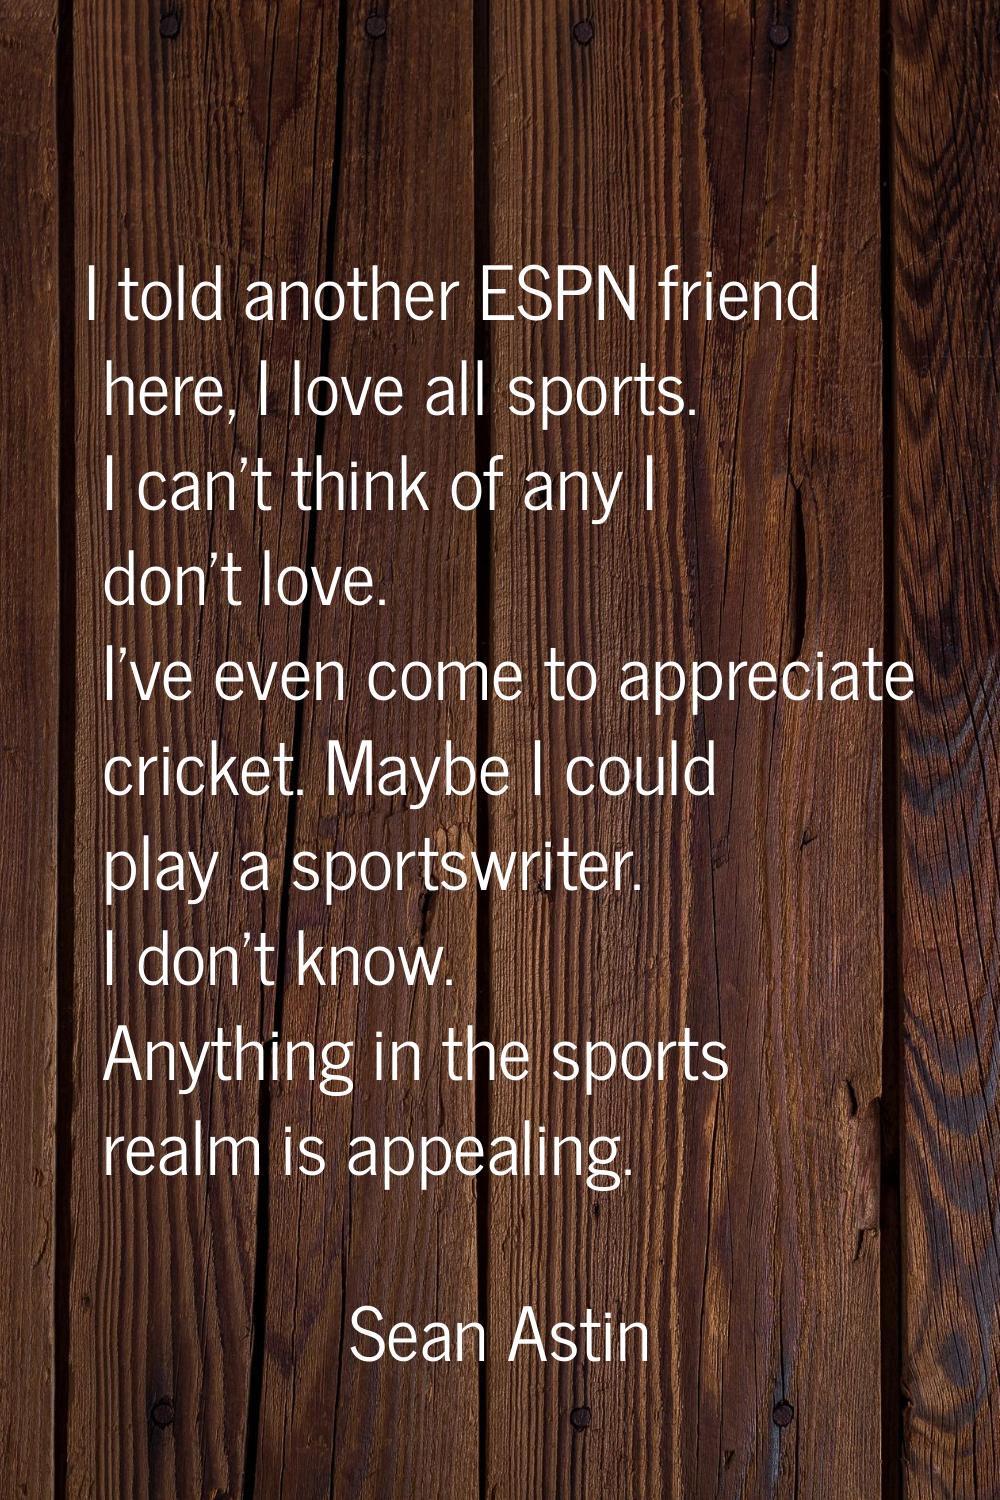 I told another ESPN friend here, I love all sports. I can't think of any I don't love. I've even co